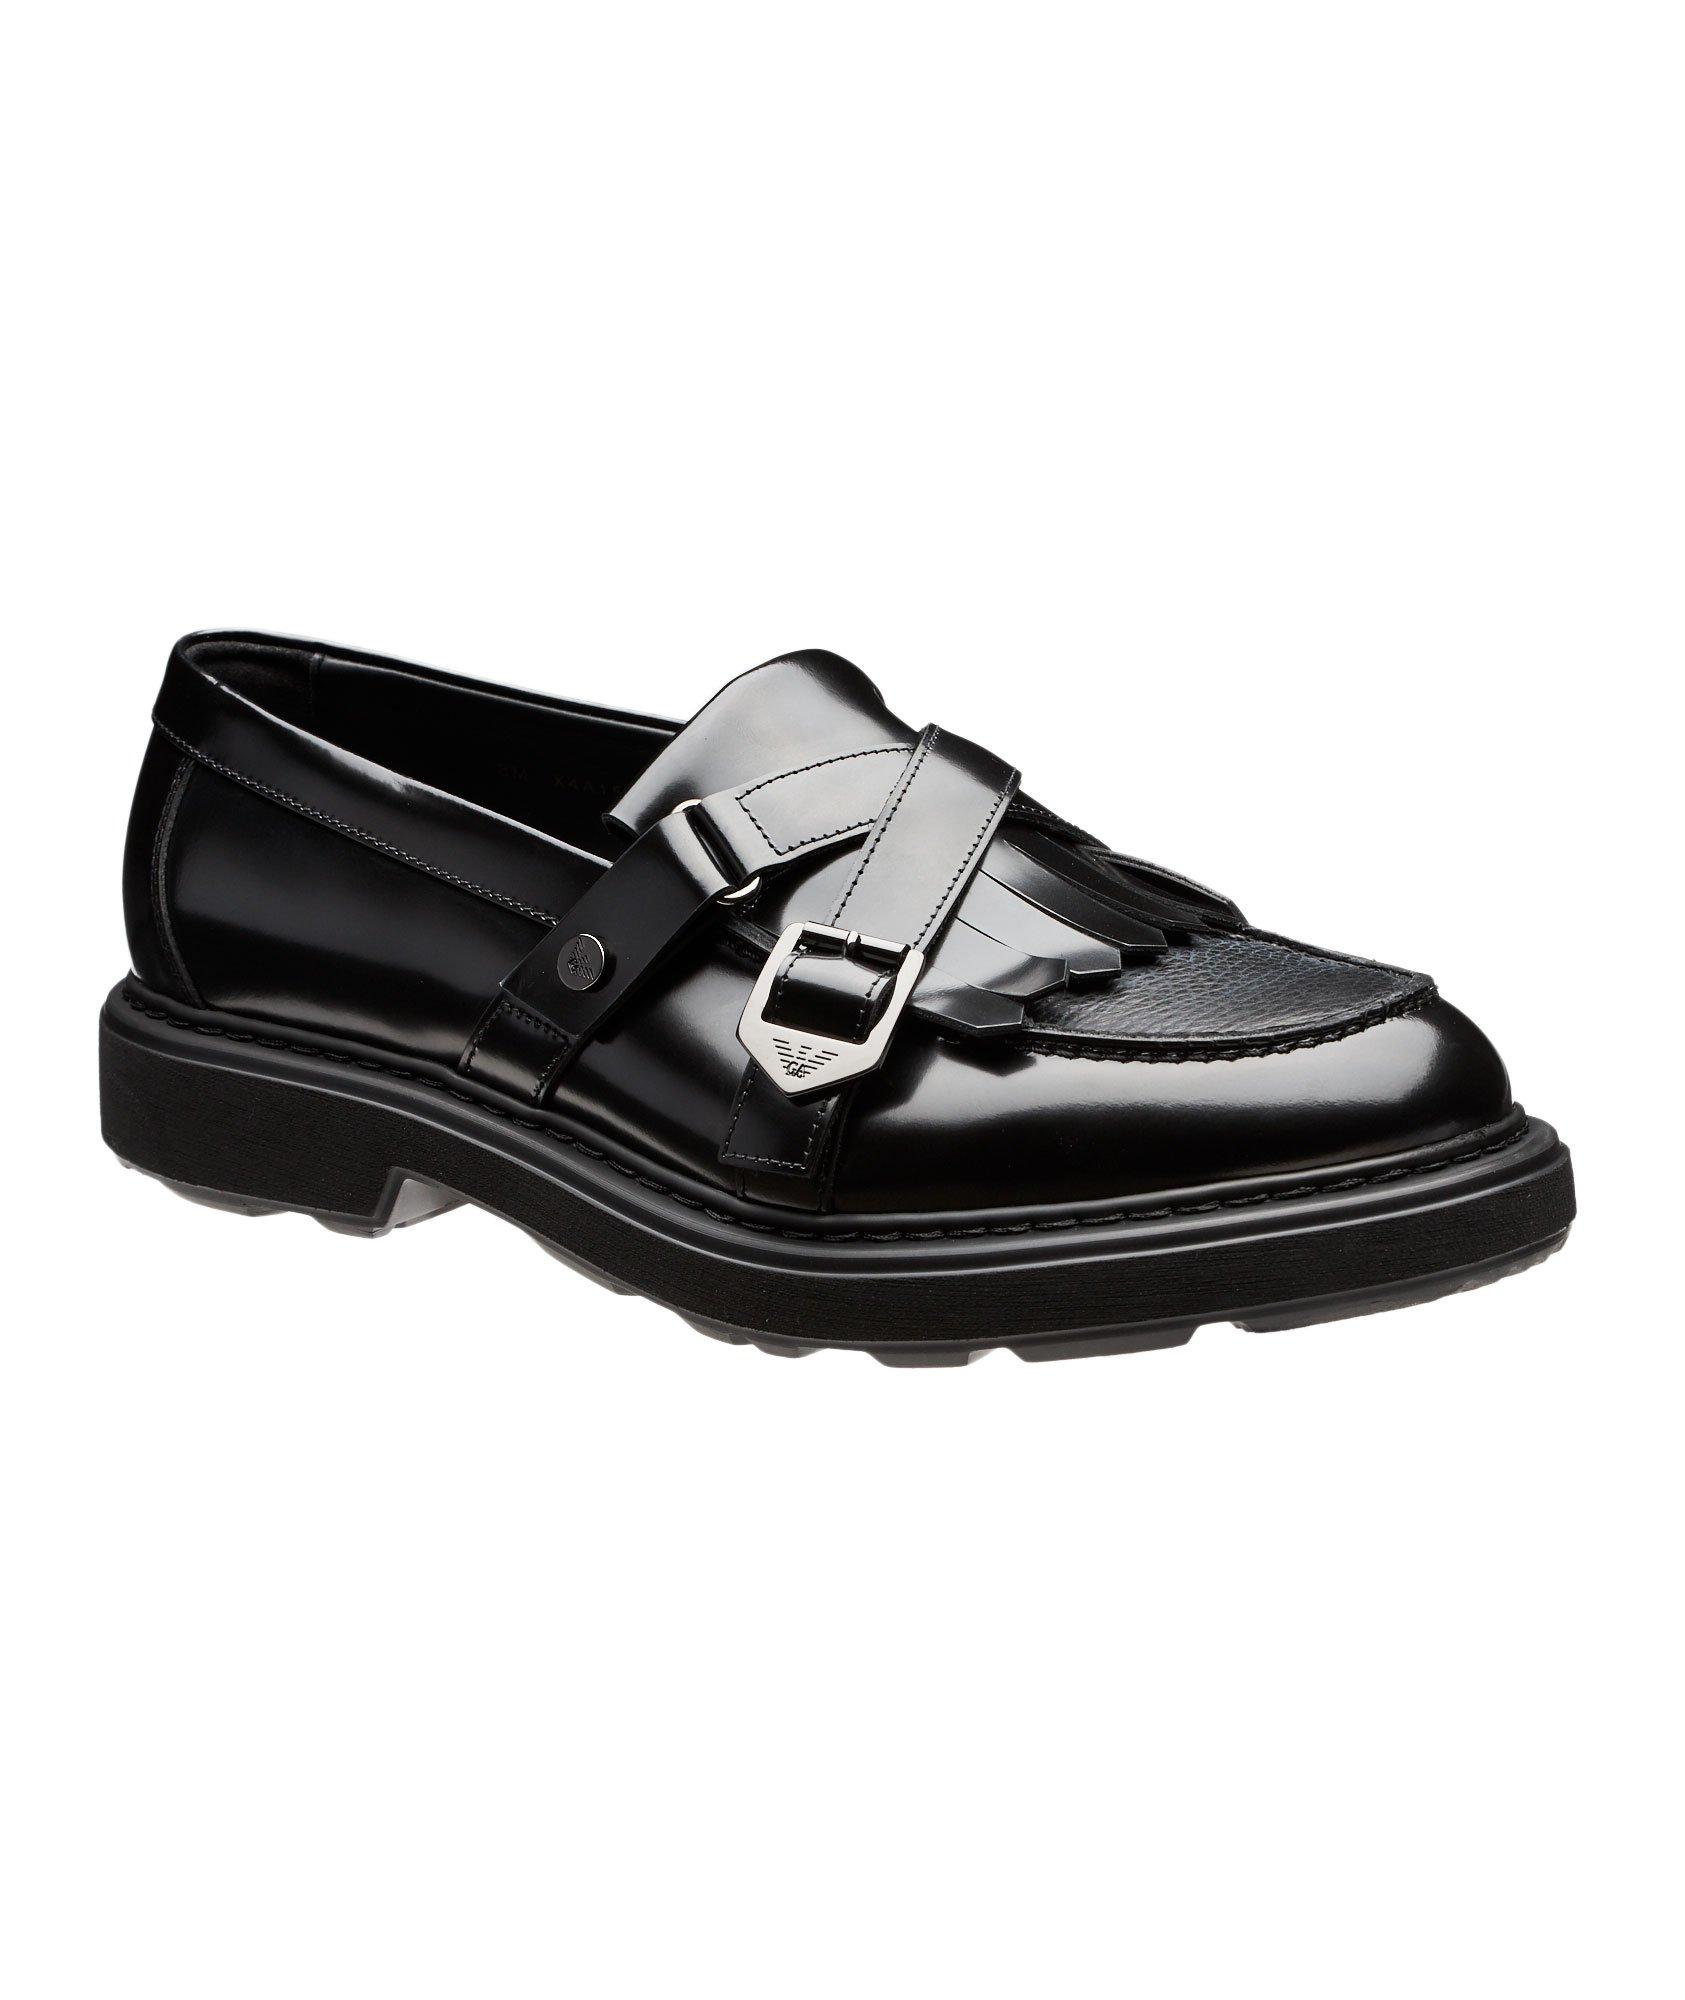 Fringed Leather Loafers image 0